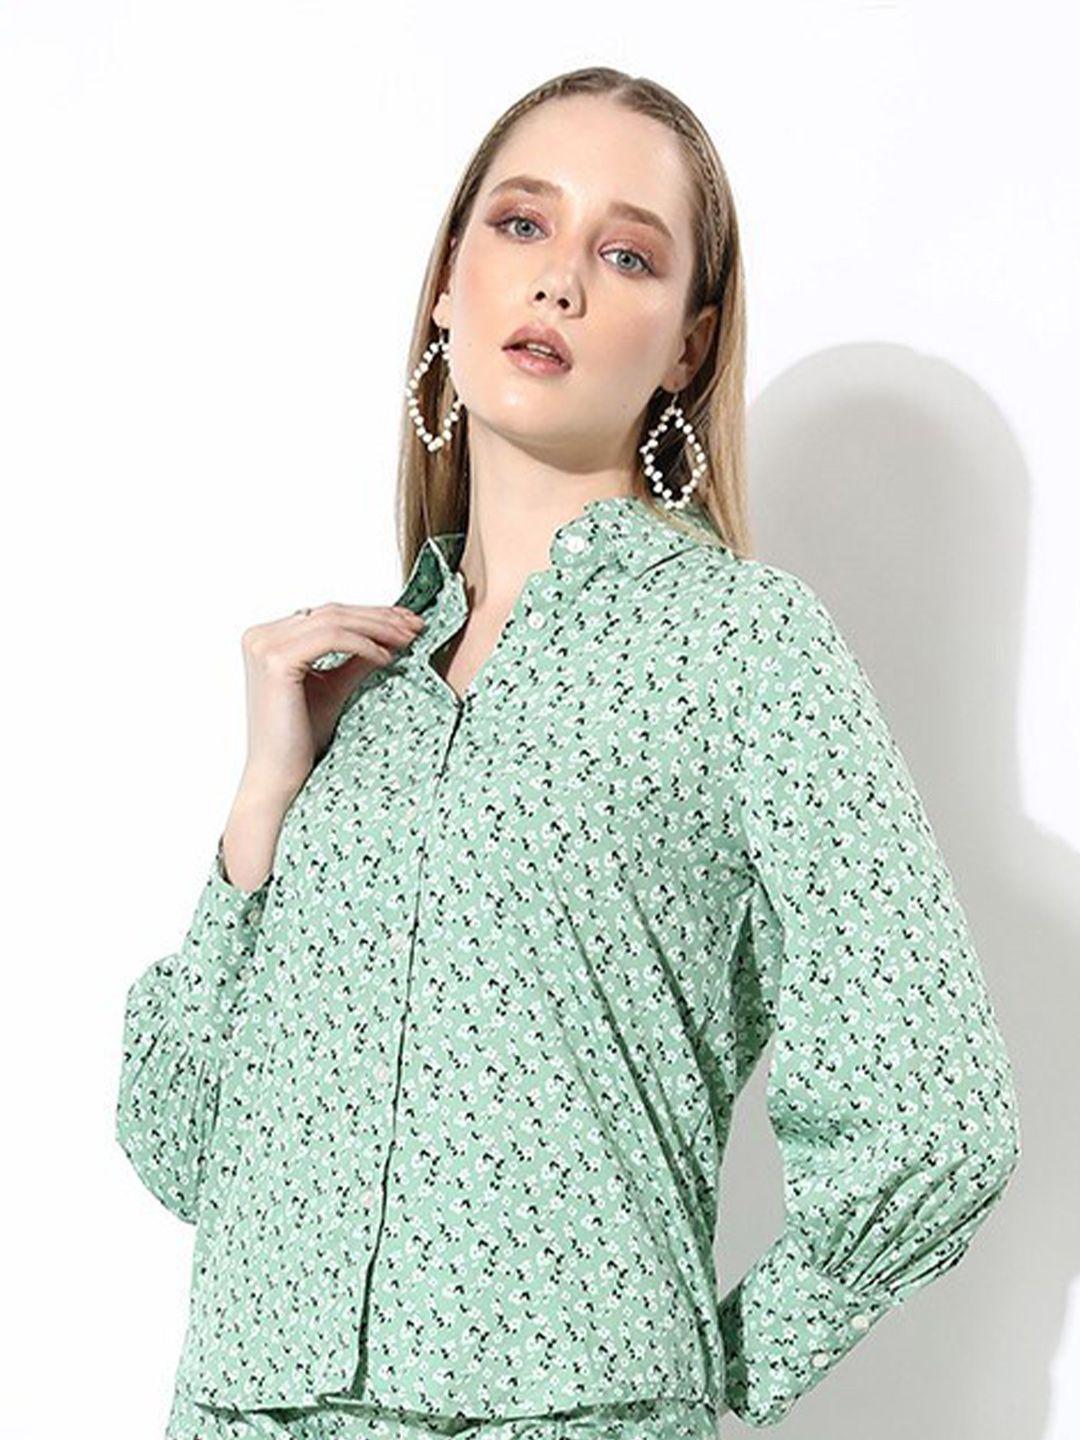 anvi-be-yourself-green-&-black-floral-printed-shirt-collar-gathered-crepe-shirt-style-top